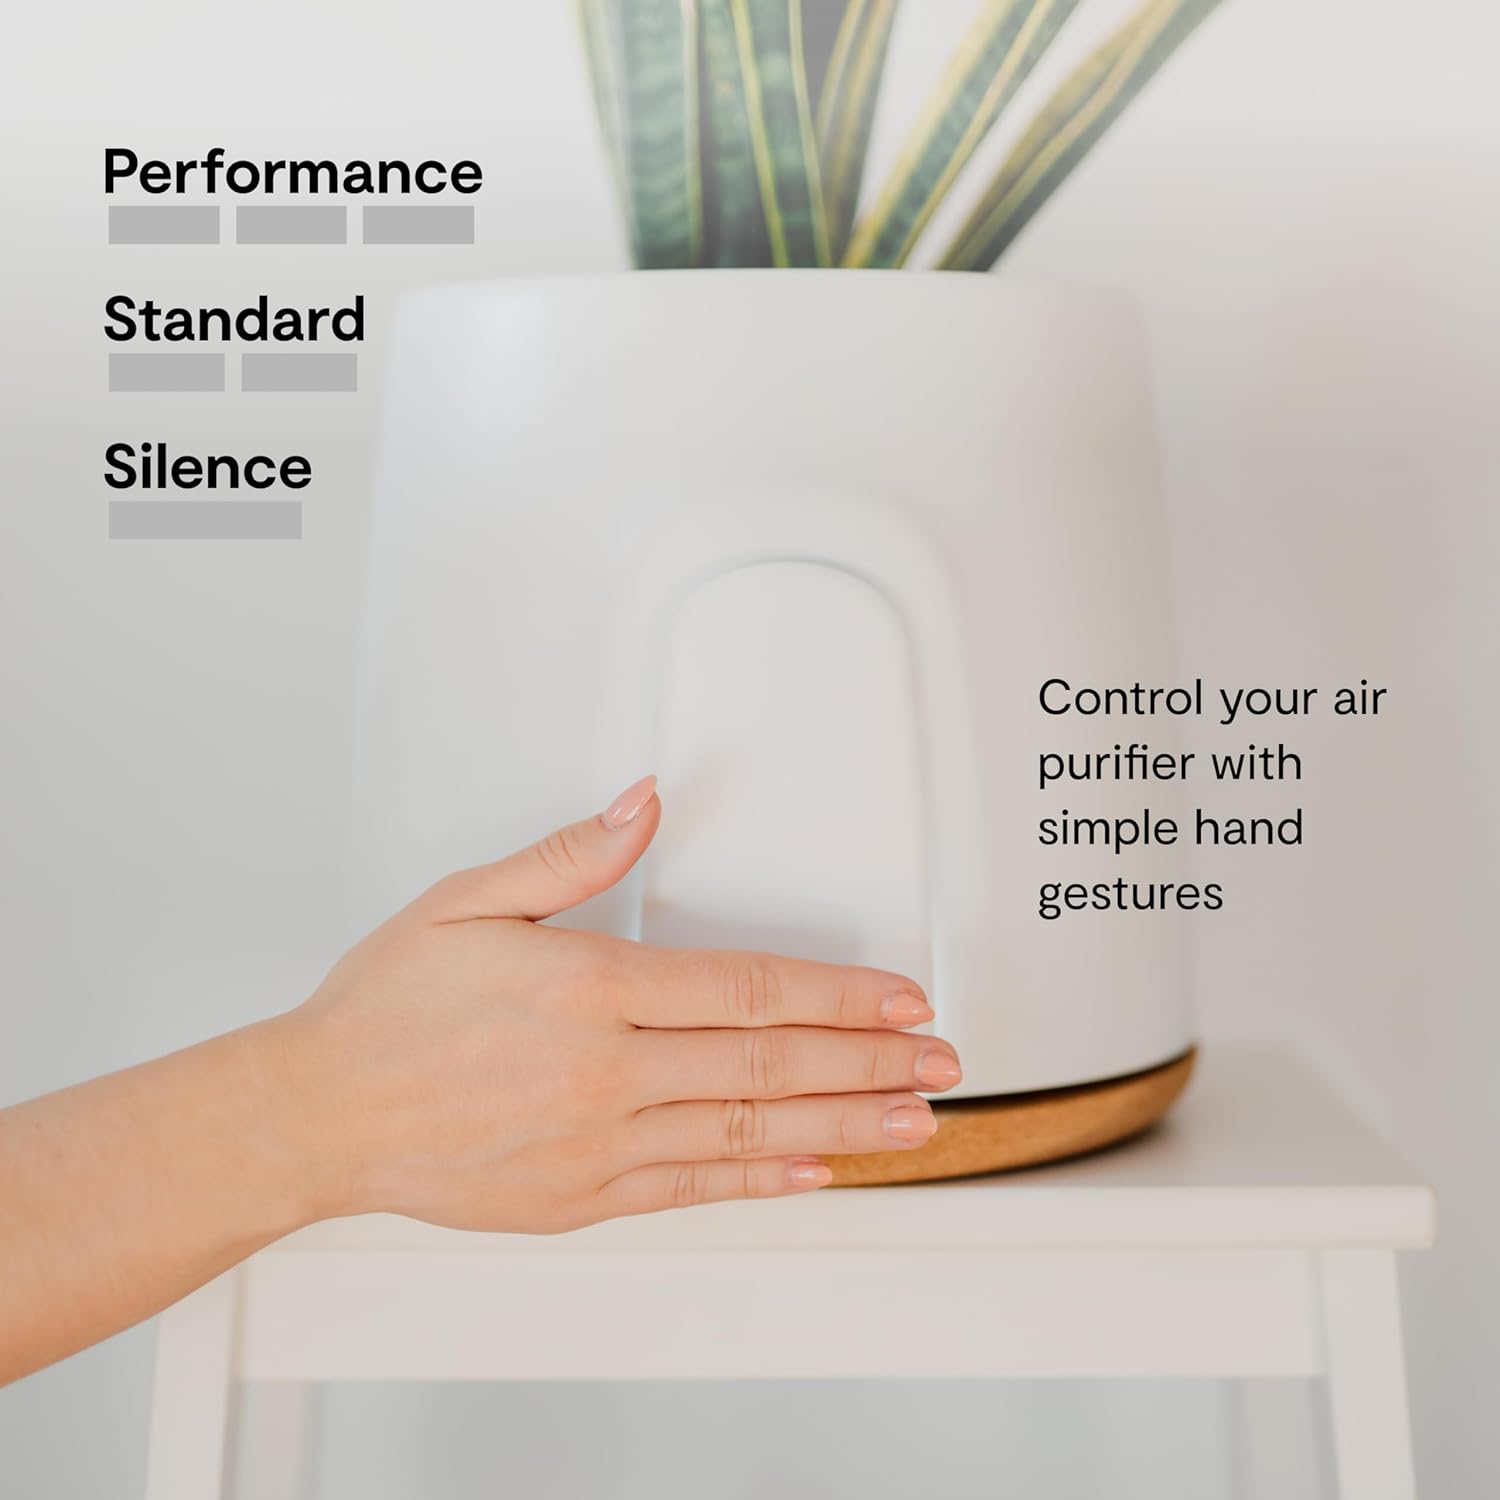 VITESY NATEDE BASIC Air Purifier Without Filters to Change | - 99% of Bacteria, Microbes, Mold, VOCs and Viruses | Capture Ambient Odors | Sustainable and MADE IN ITALY - Amazing Gadgets Outlet